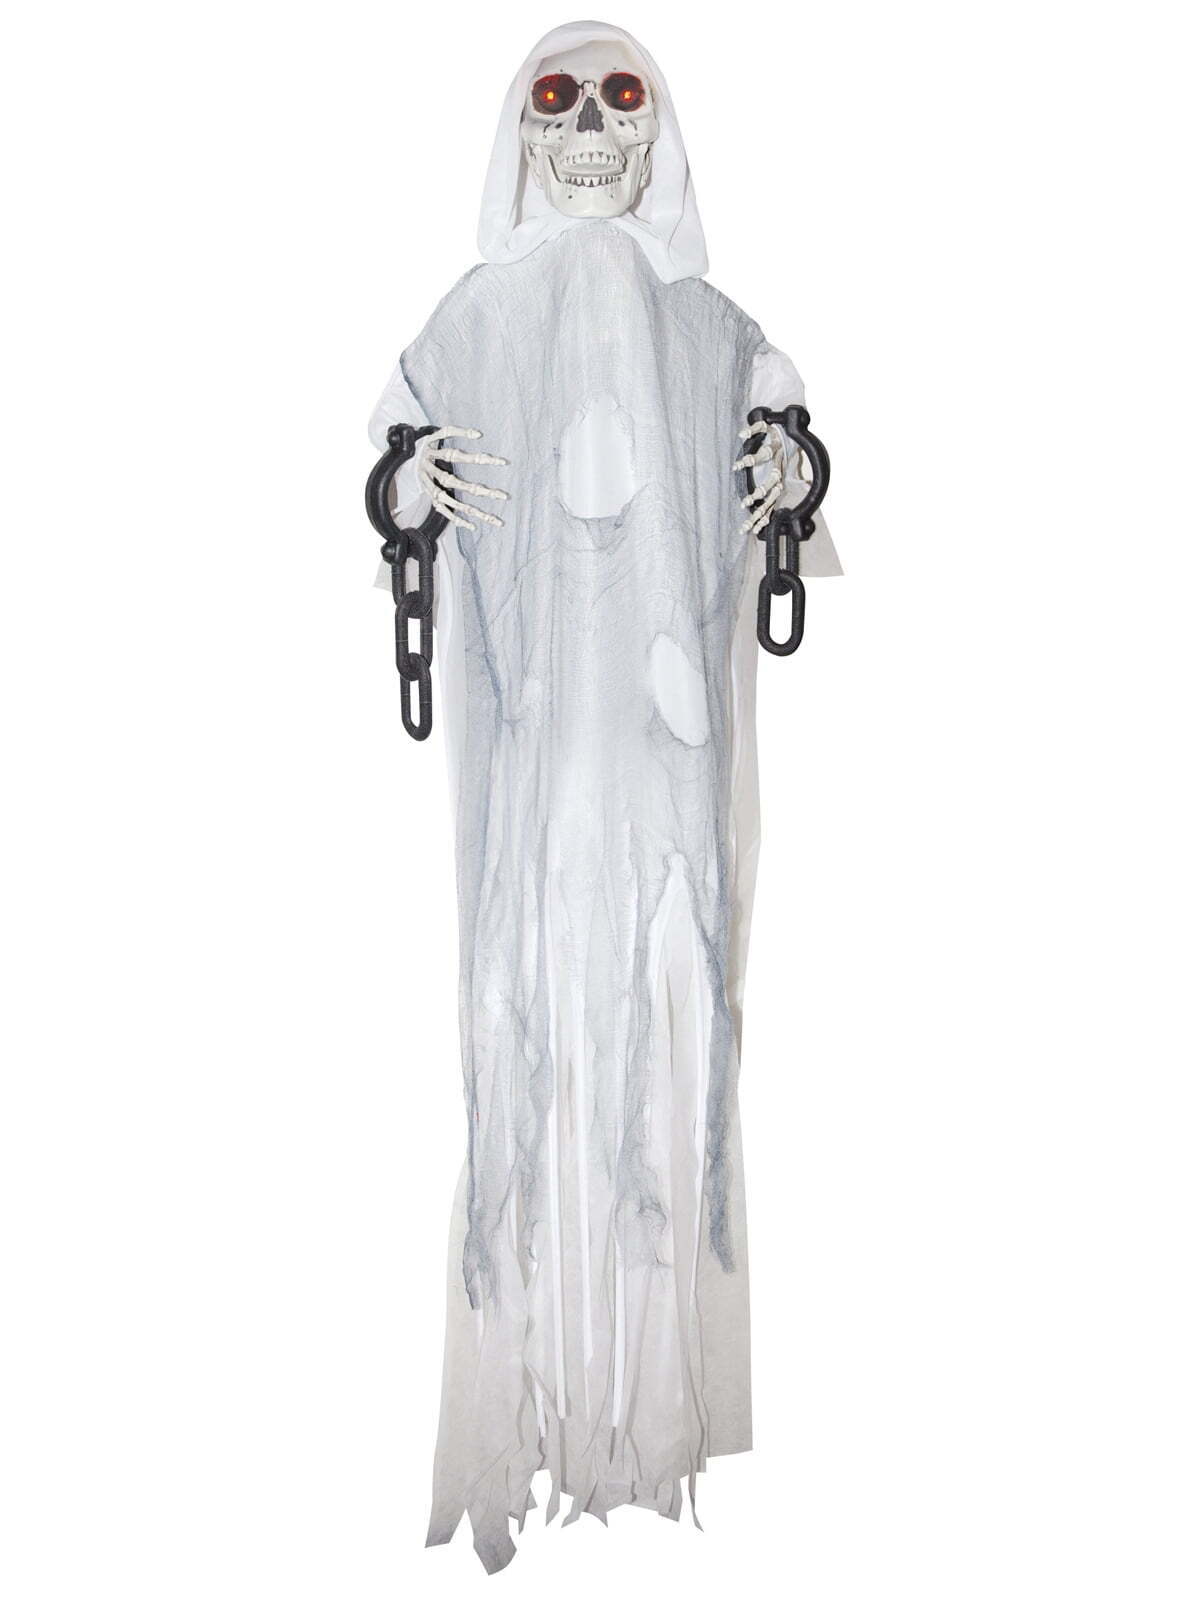 Animated Hanging White Reaper in Chains